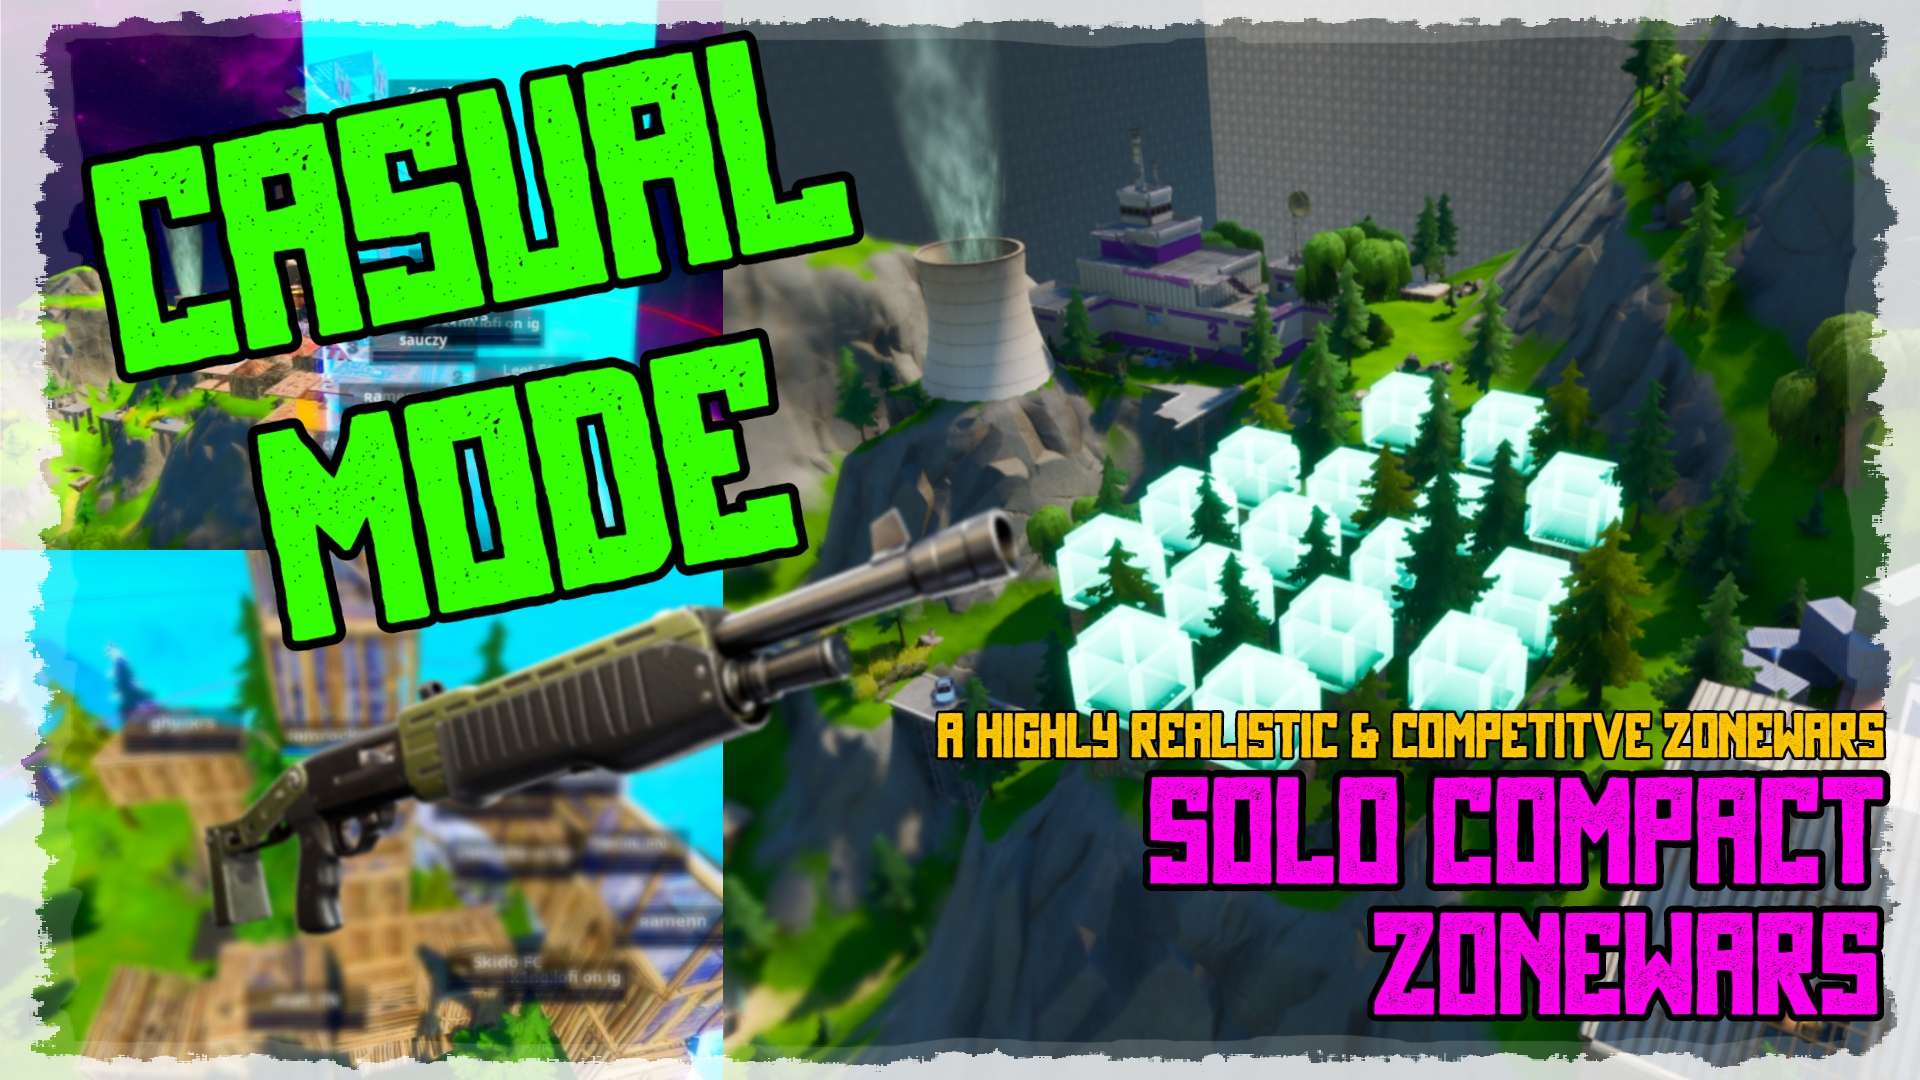 🏰 Castle Wars ☠️ - Fortnite Creative Team Deathmatch and Tycoon Map Code